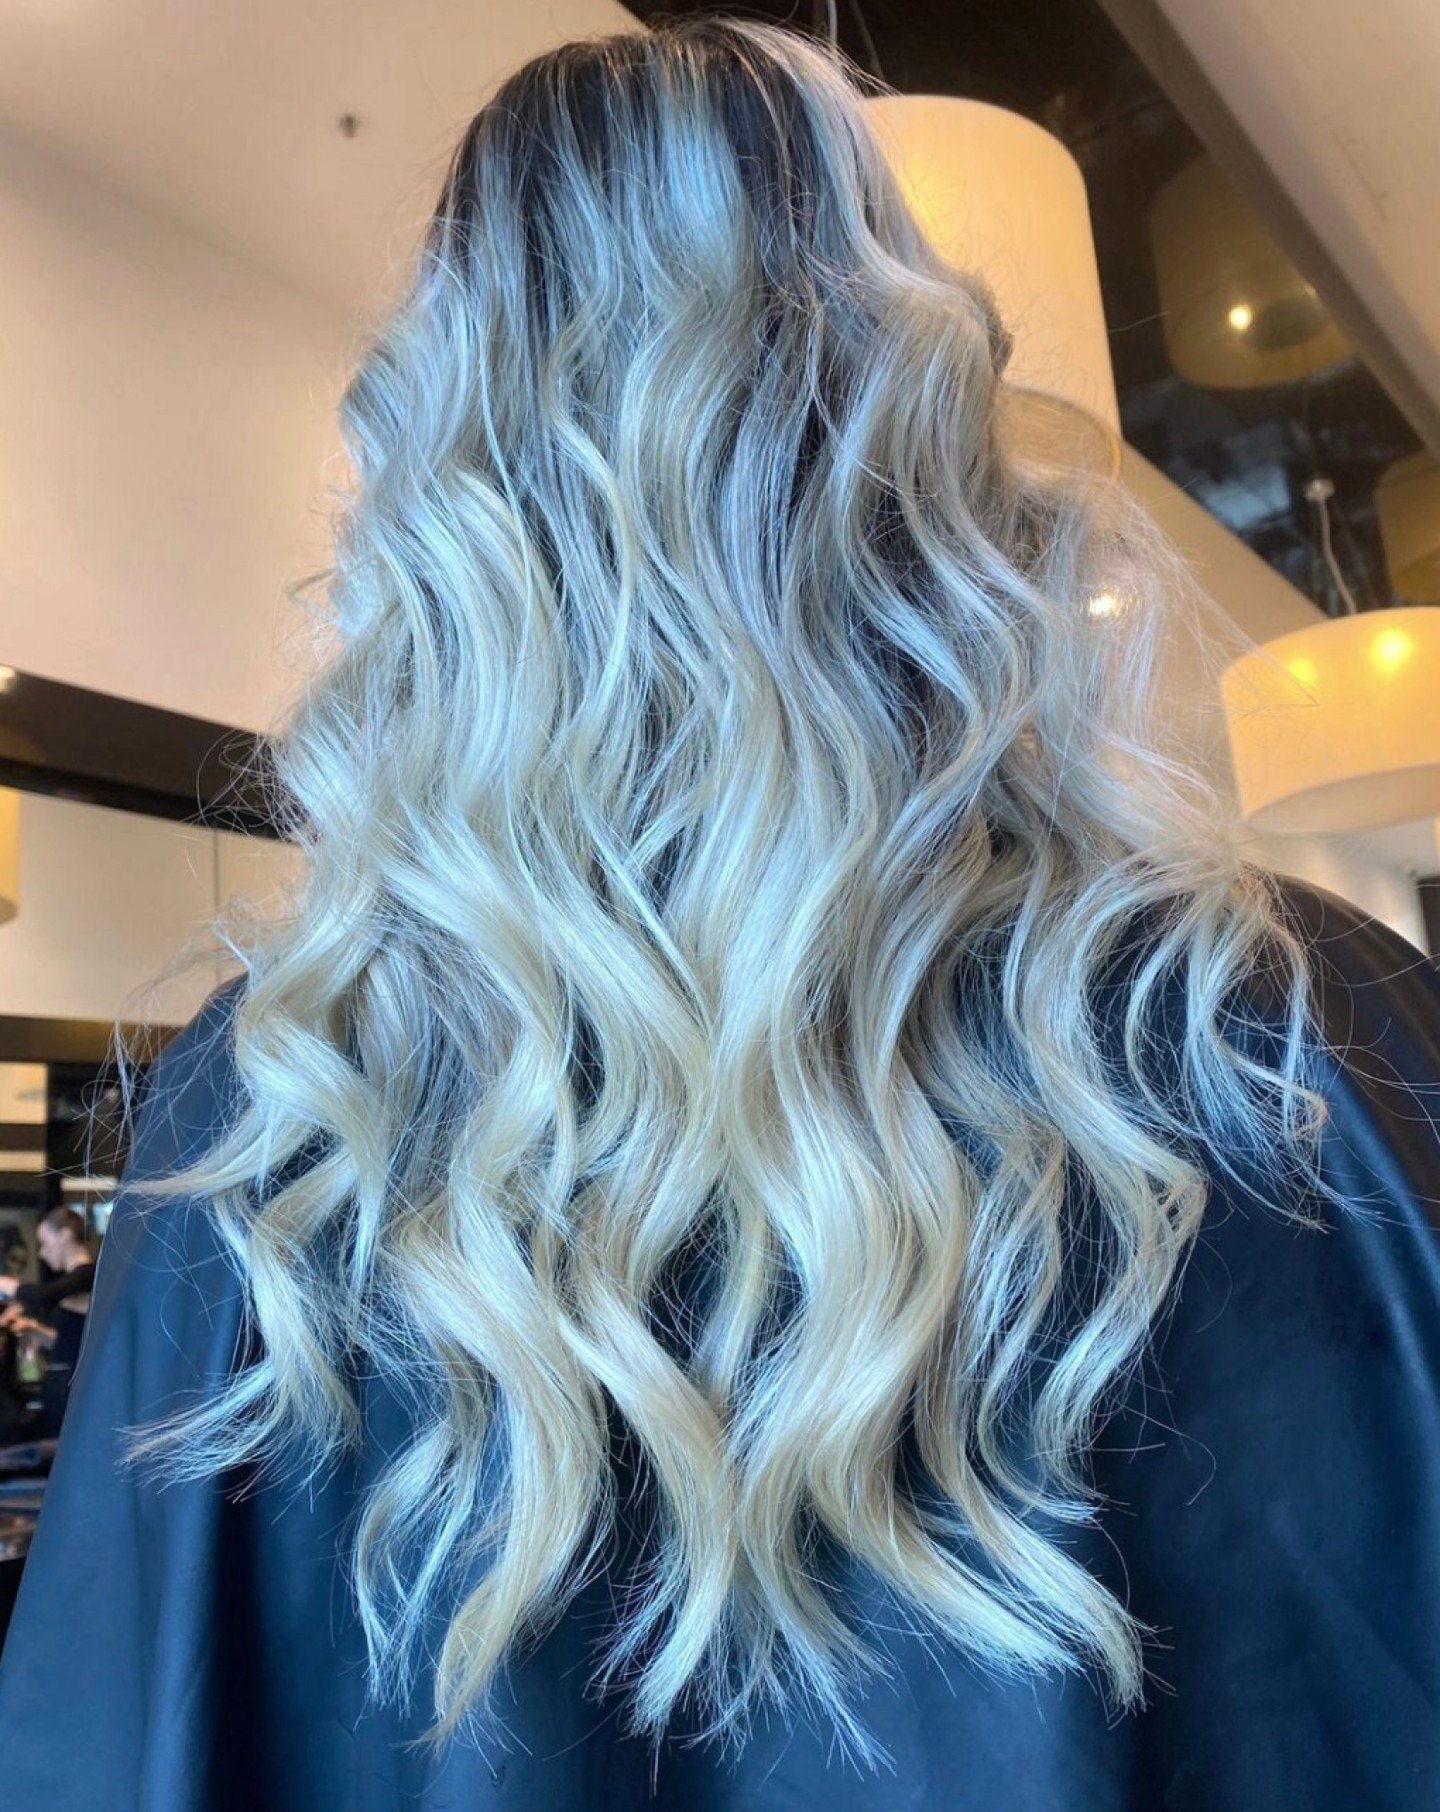 Going blonde doesn't have to mean damaged hair! Look at how healthy our lovely client's blonde locks are. Let us take care of your hair as your local blonde specialist.